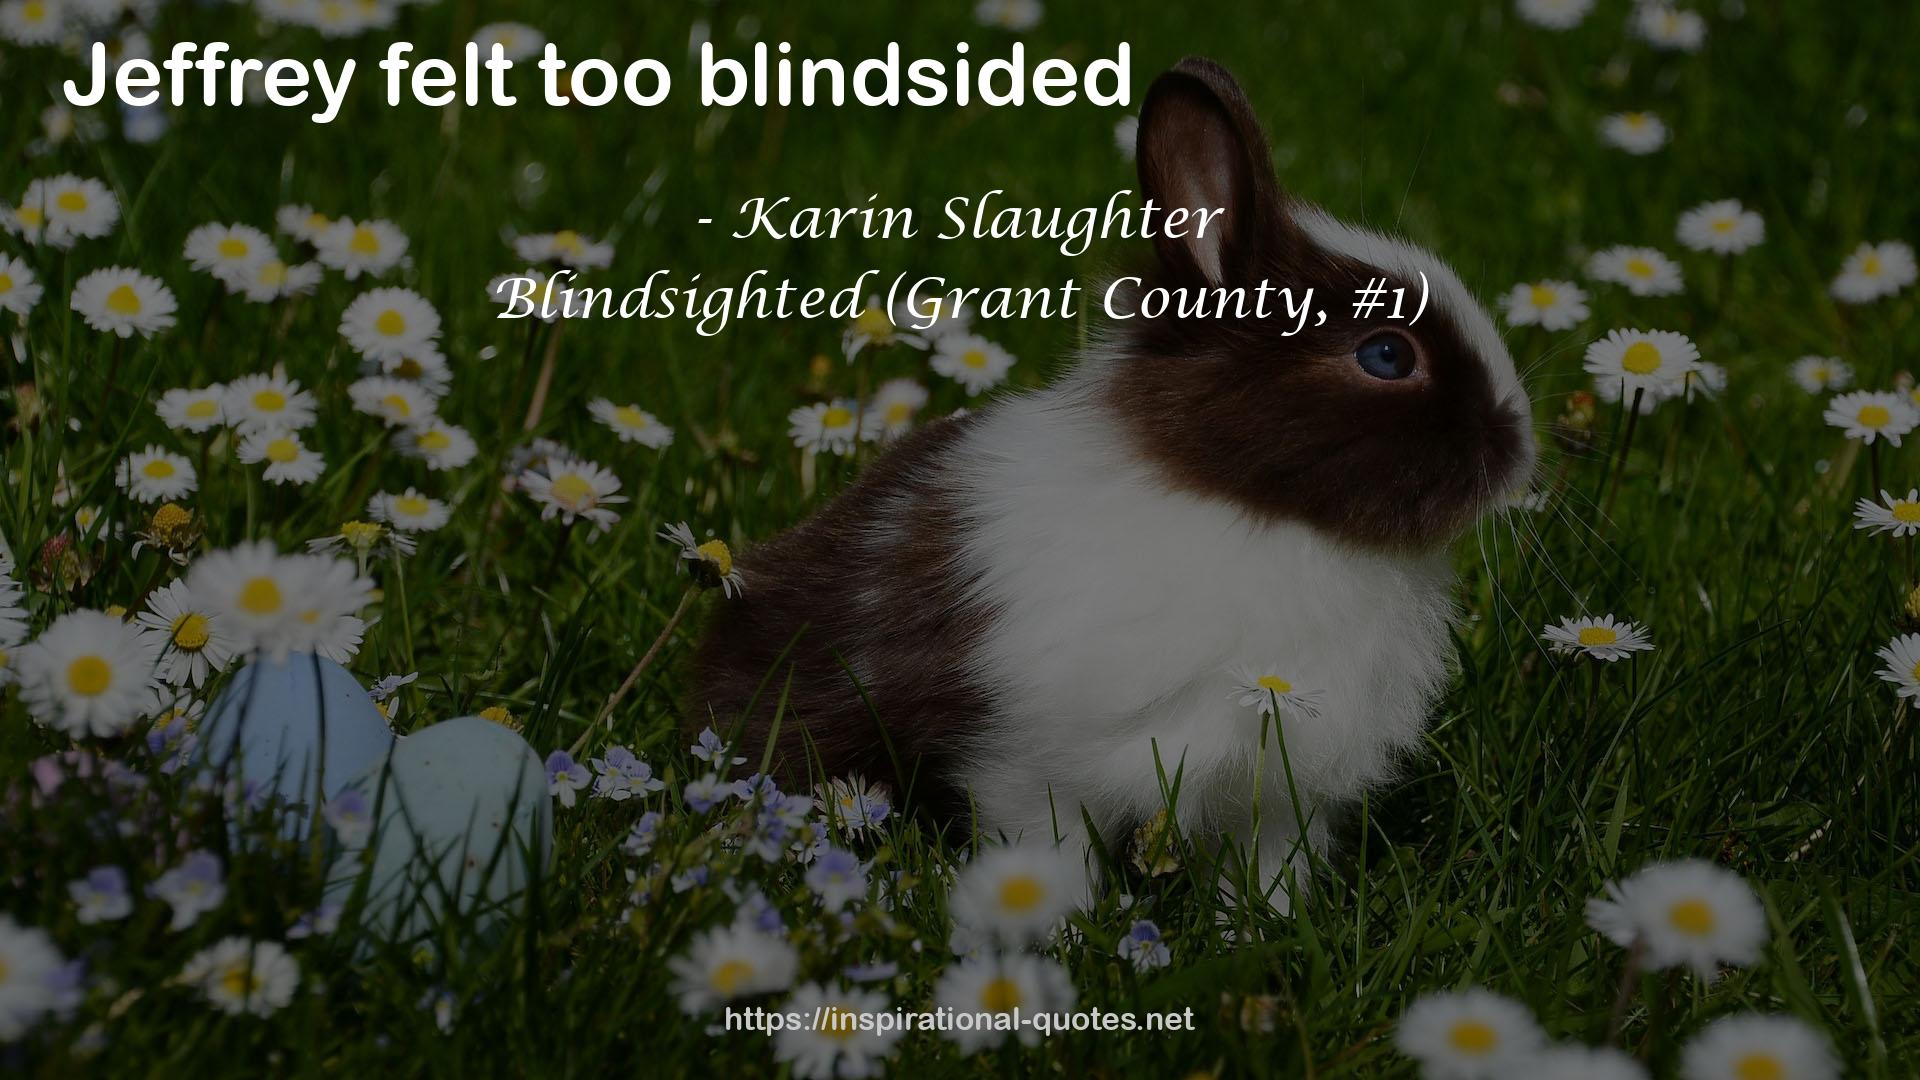 Blindsighted (Grant County, #1) QUOTES